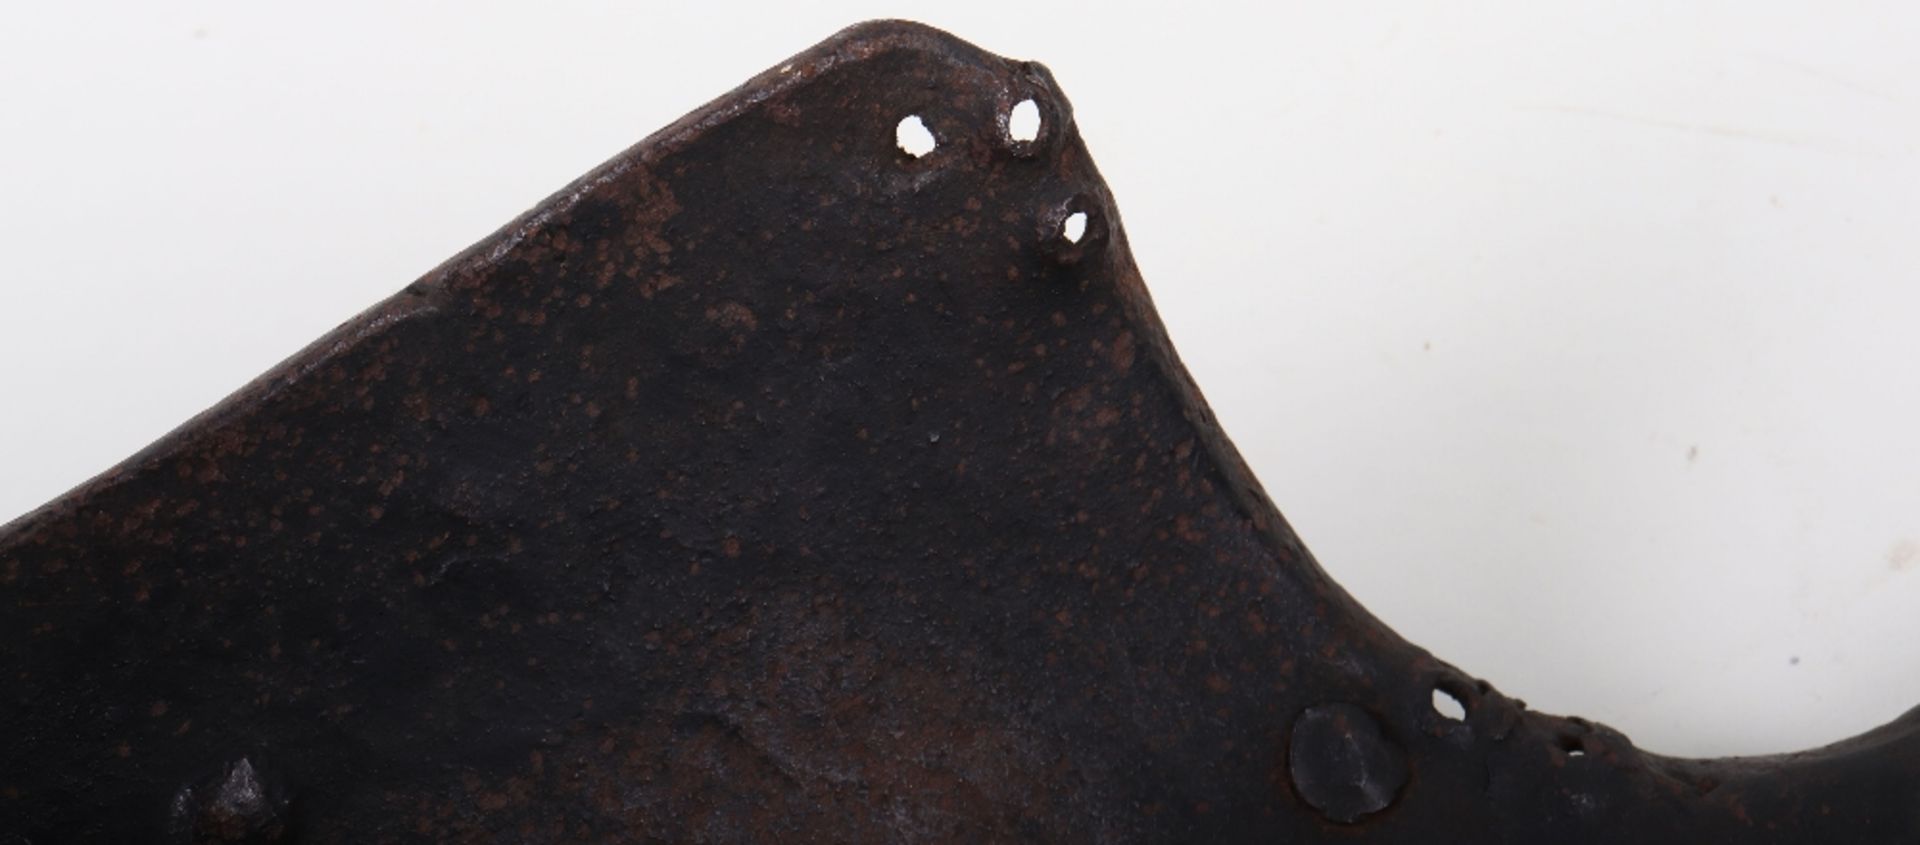 Good Heavy 17th Century Cavalry Troopers Breastplate - Image 16 of 17